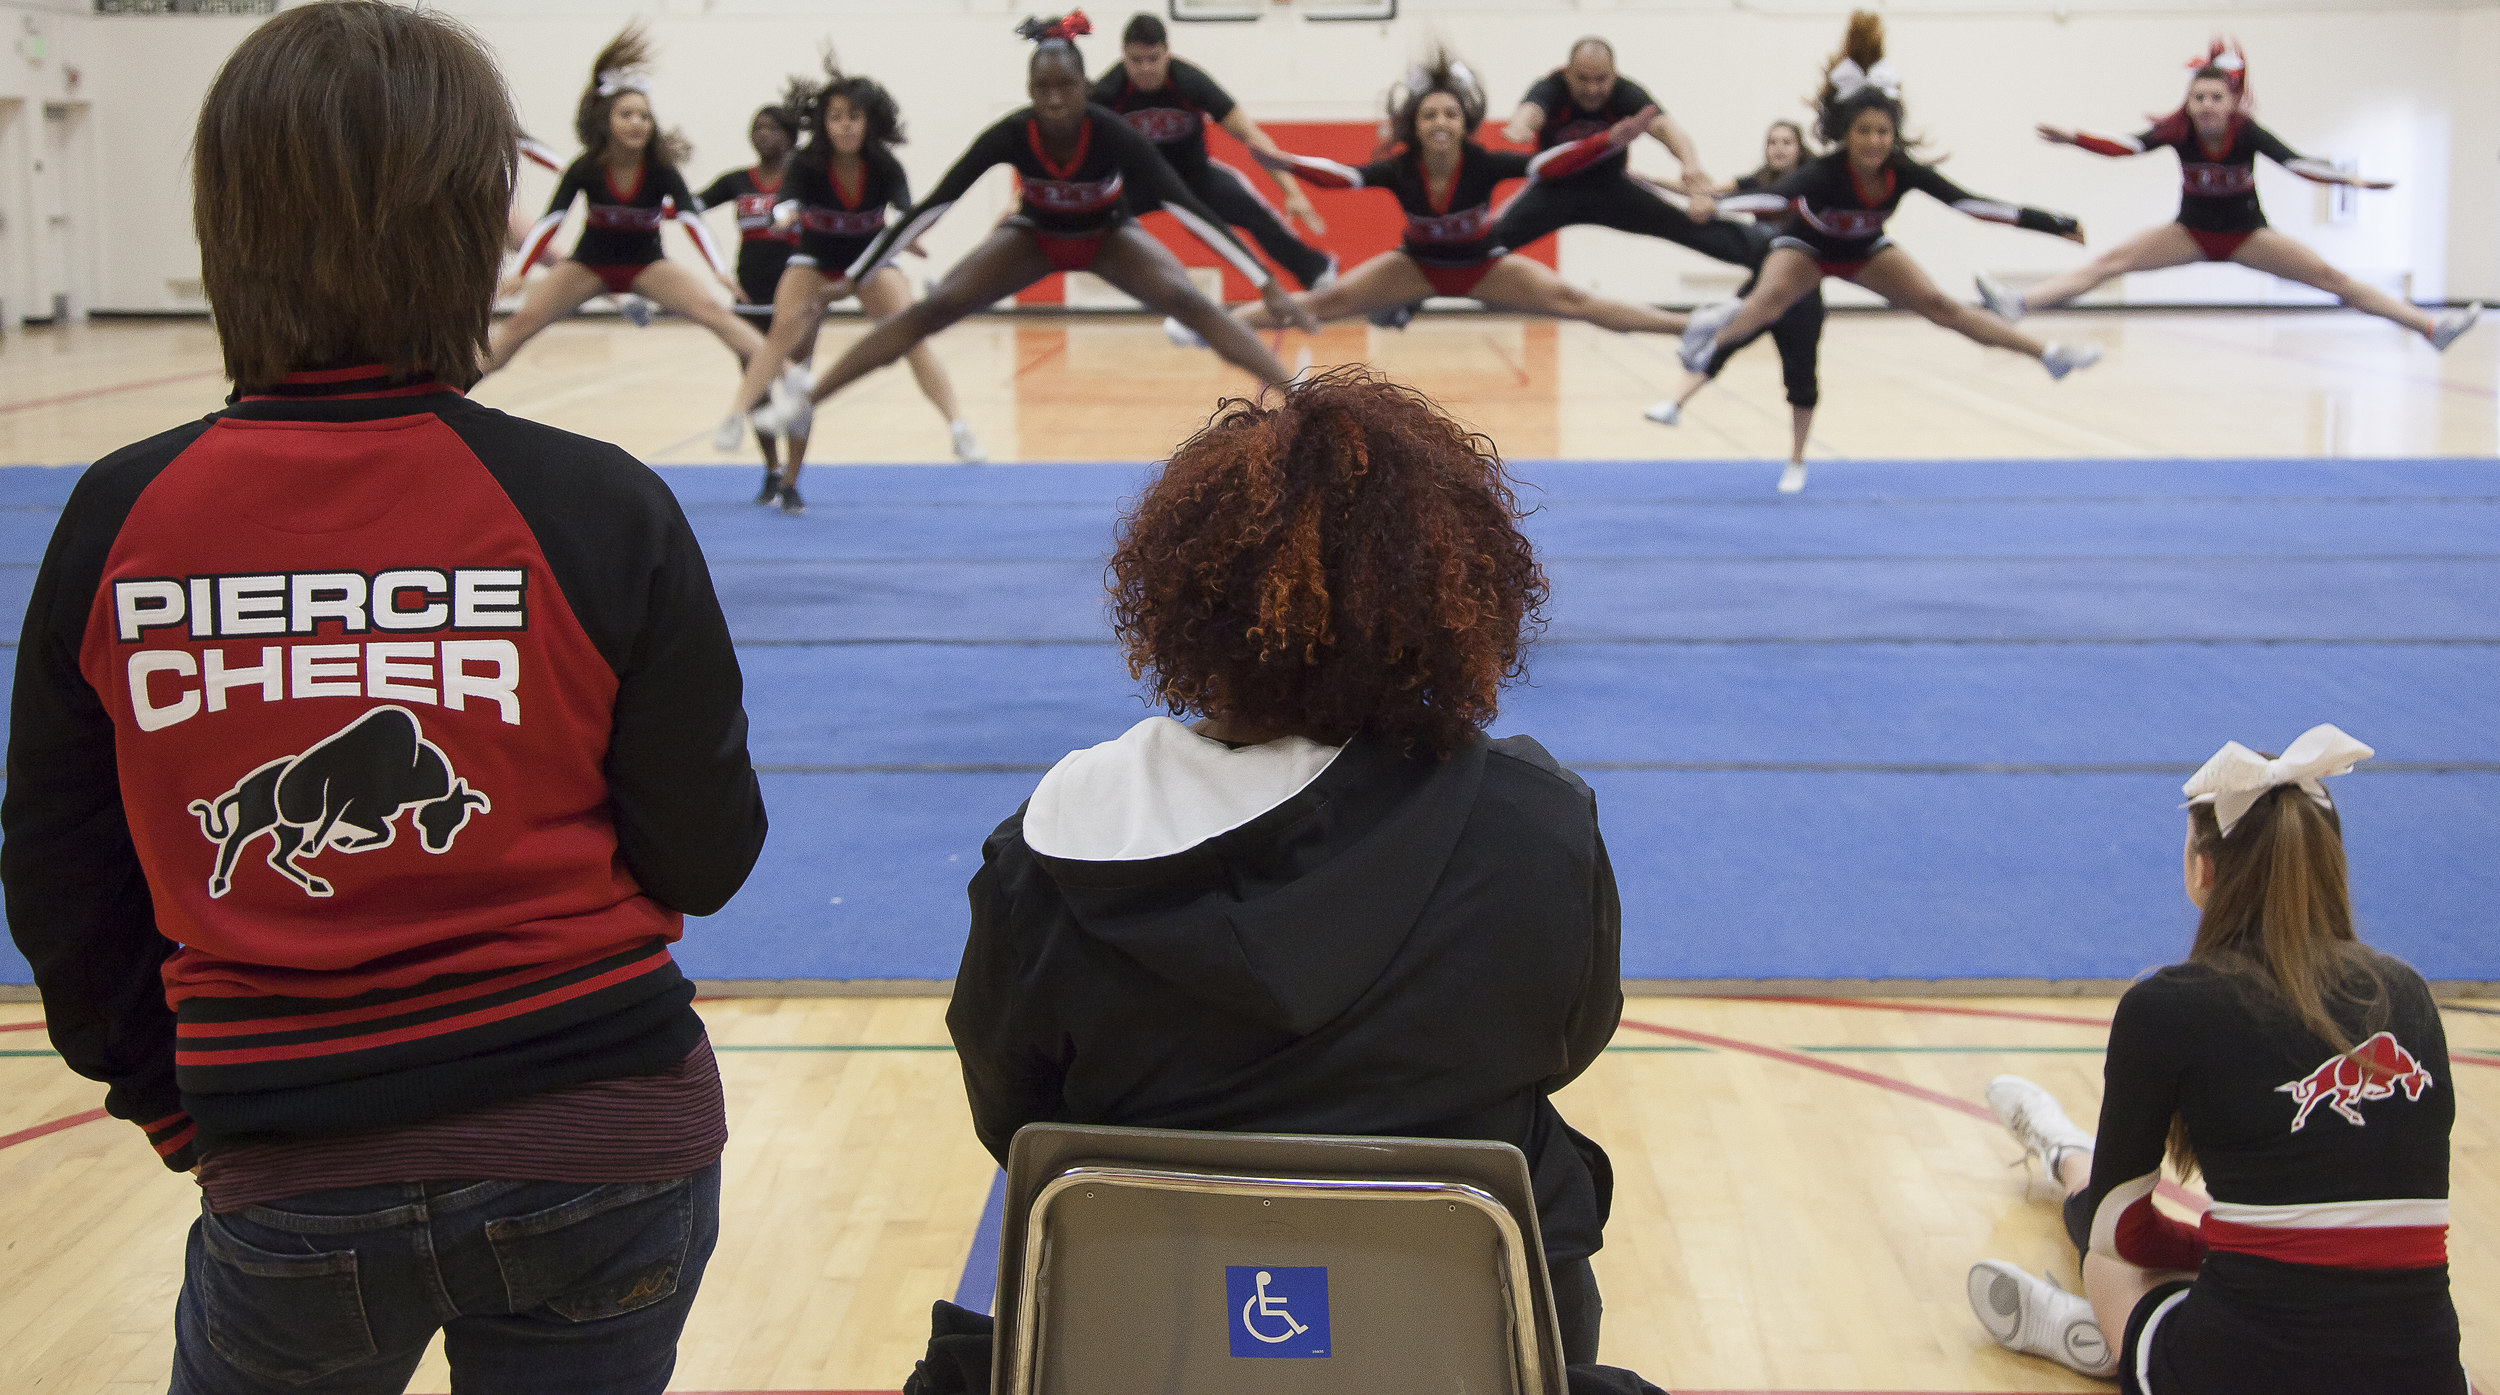  From left to right: Coach Jenny Ghiglia, Jordyn Lett and Katie Kucera watch as other members perform their routine inside the North Gym of Pierce College on Sunday March 1, 2015. Woodland Hills, Calif.  Read the full story&nbsp; here  